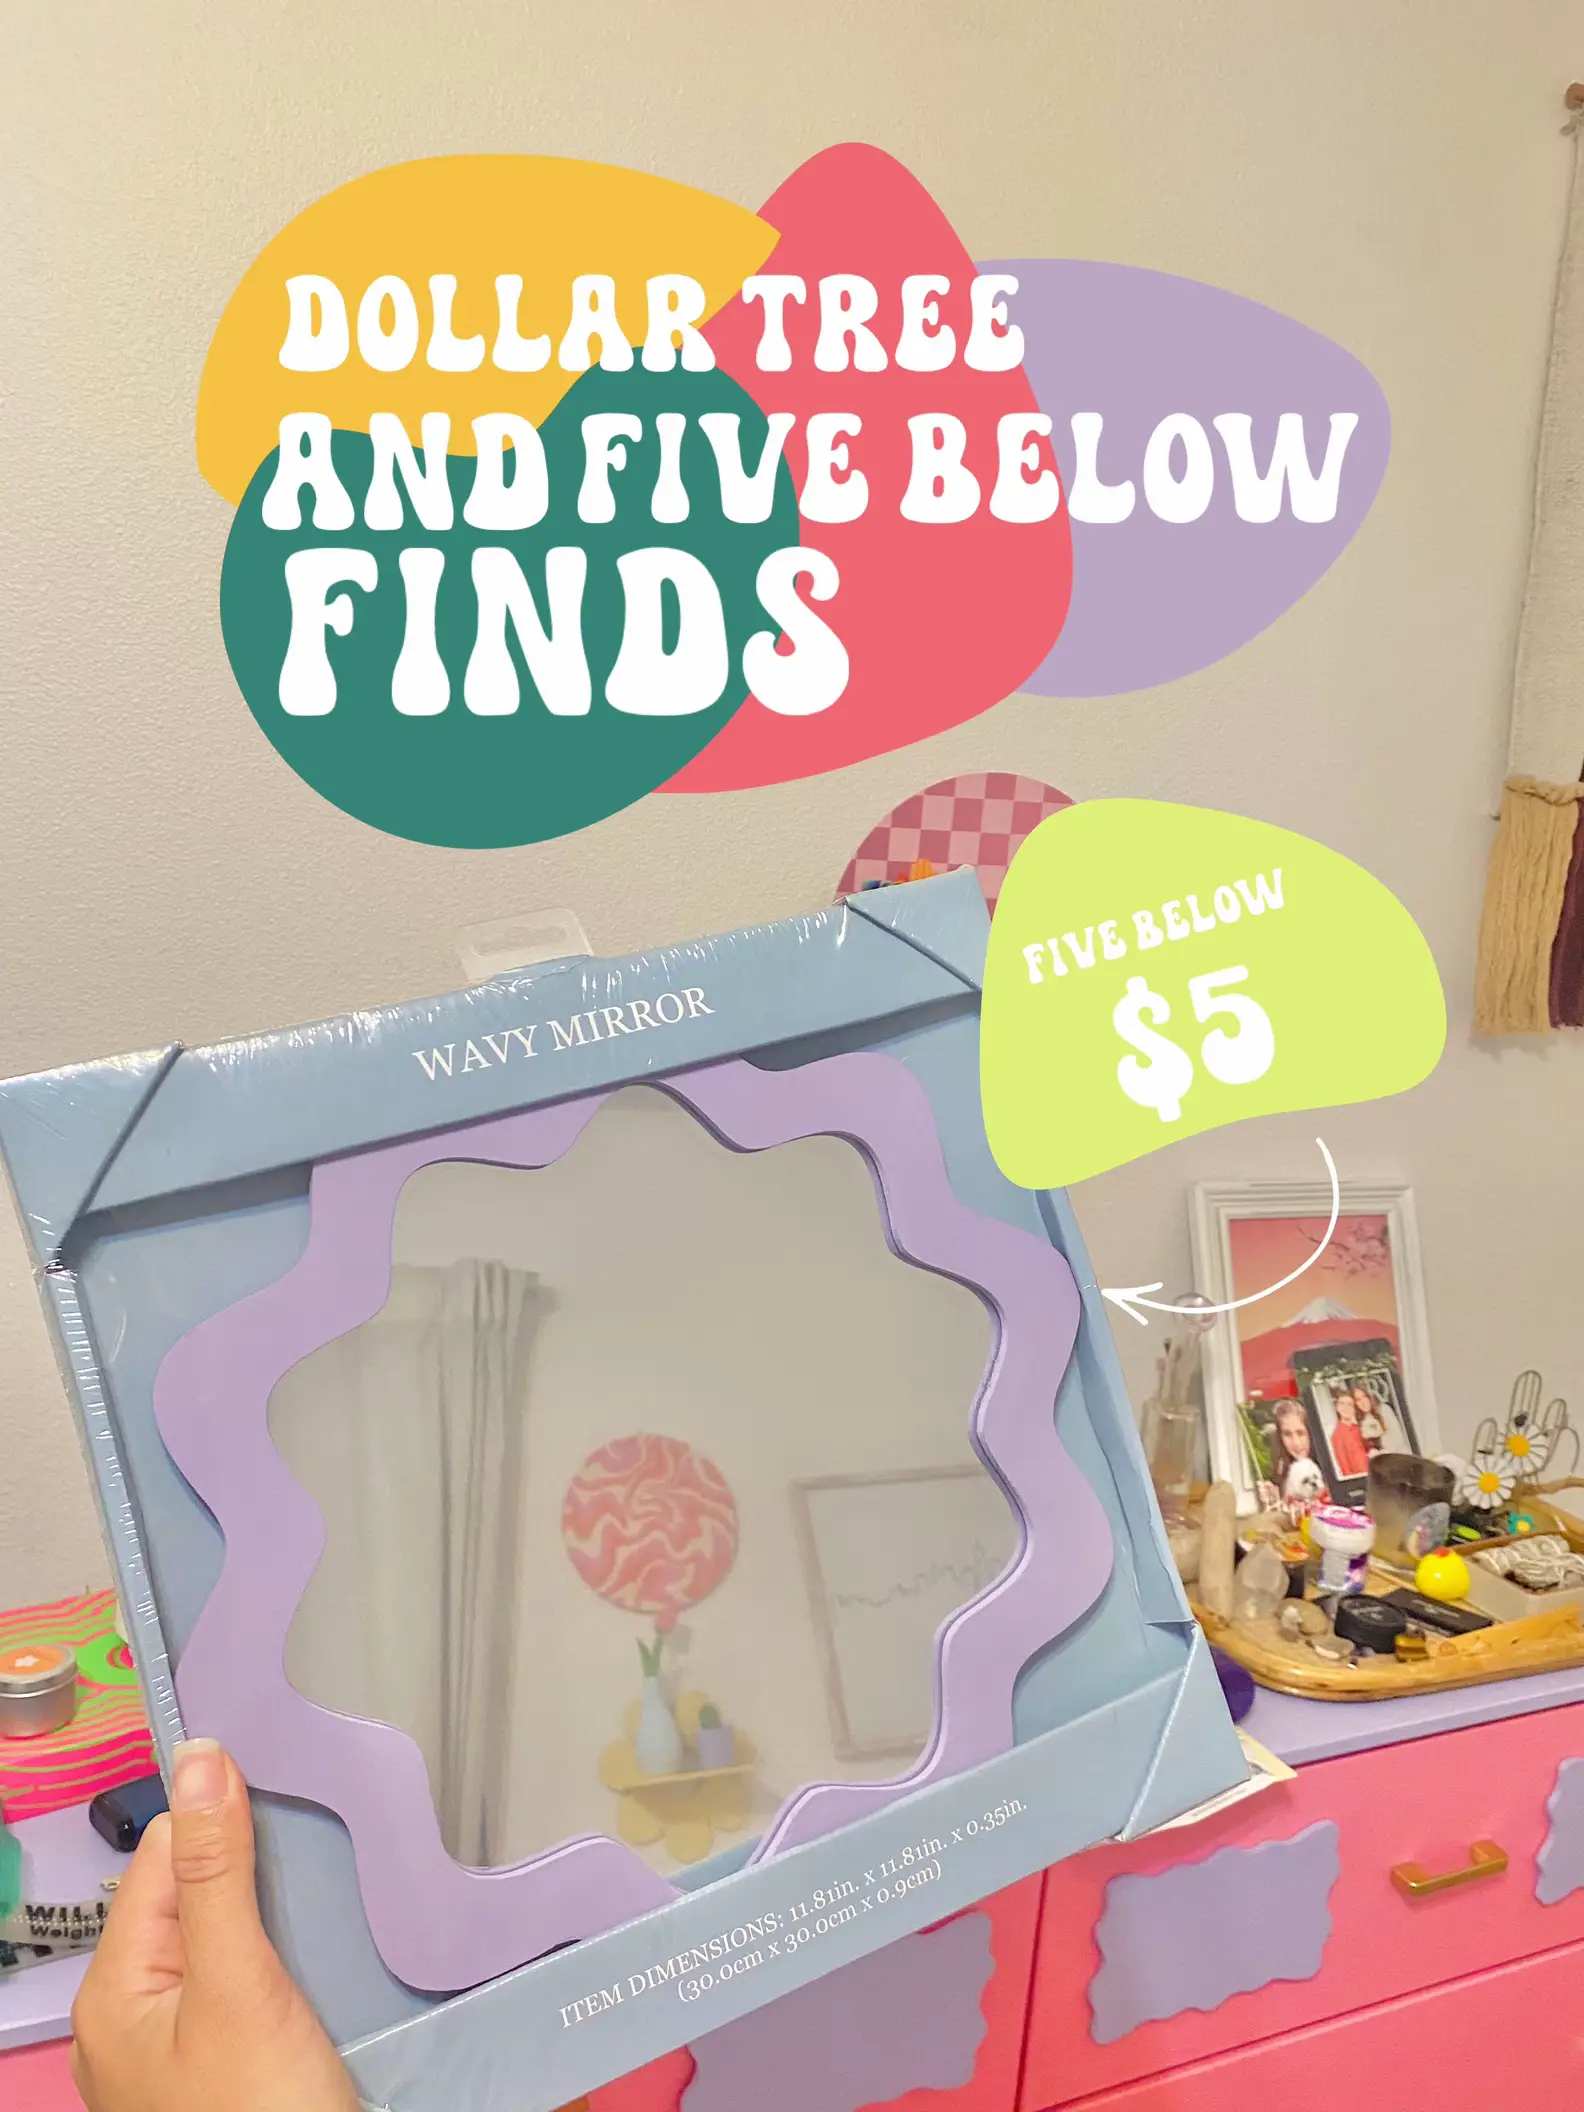 Five Bellow Five Dollar Finds!, Gallery posted by Gigi prezia